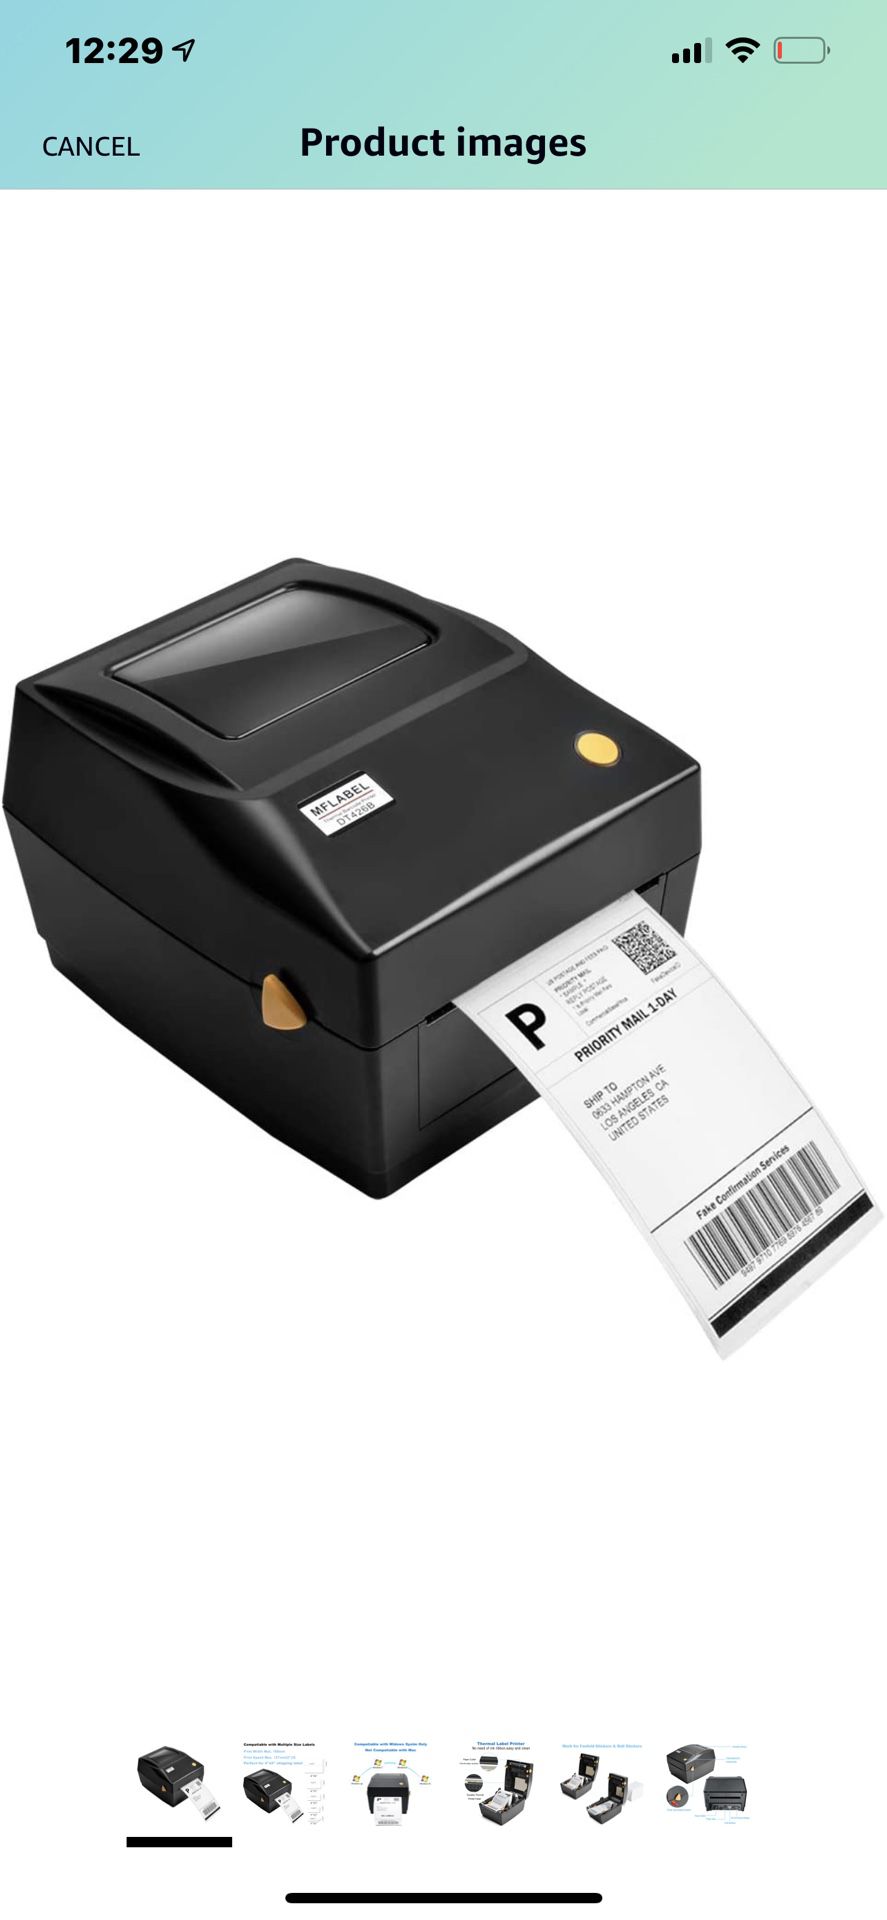 Label Printer, 4x6 Thermal Printer, Commercial Direct Thermal High Speed USB Port Label Maker Machine, Etsy, Ebay, Amazon Barcode Express Label Printi